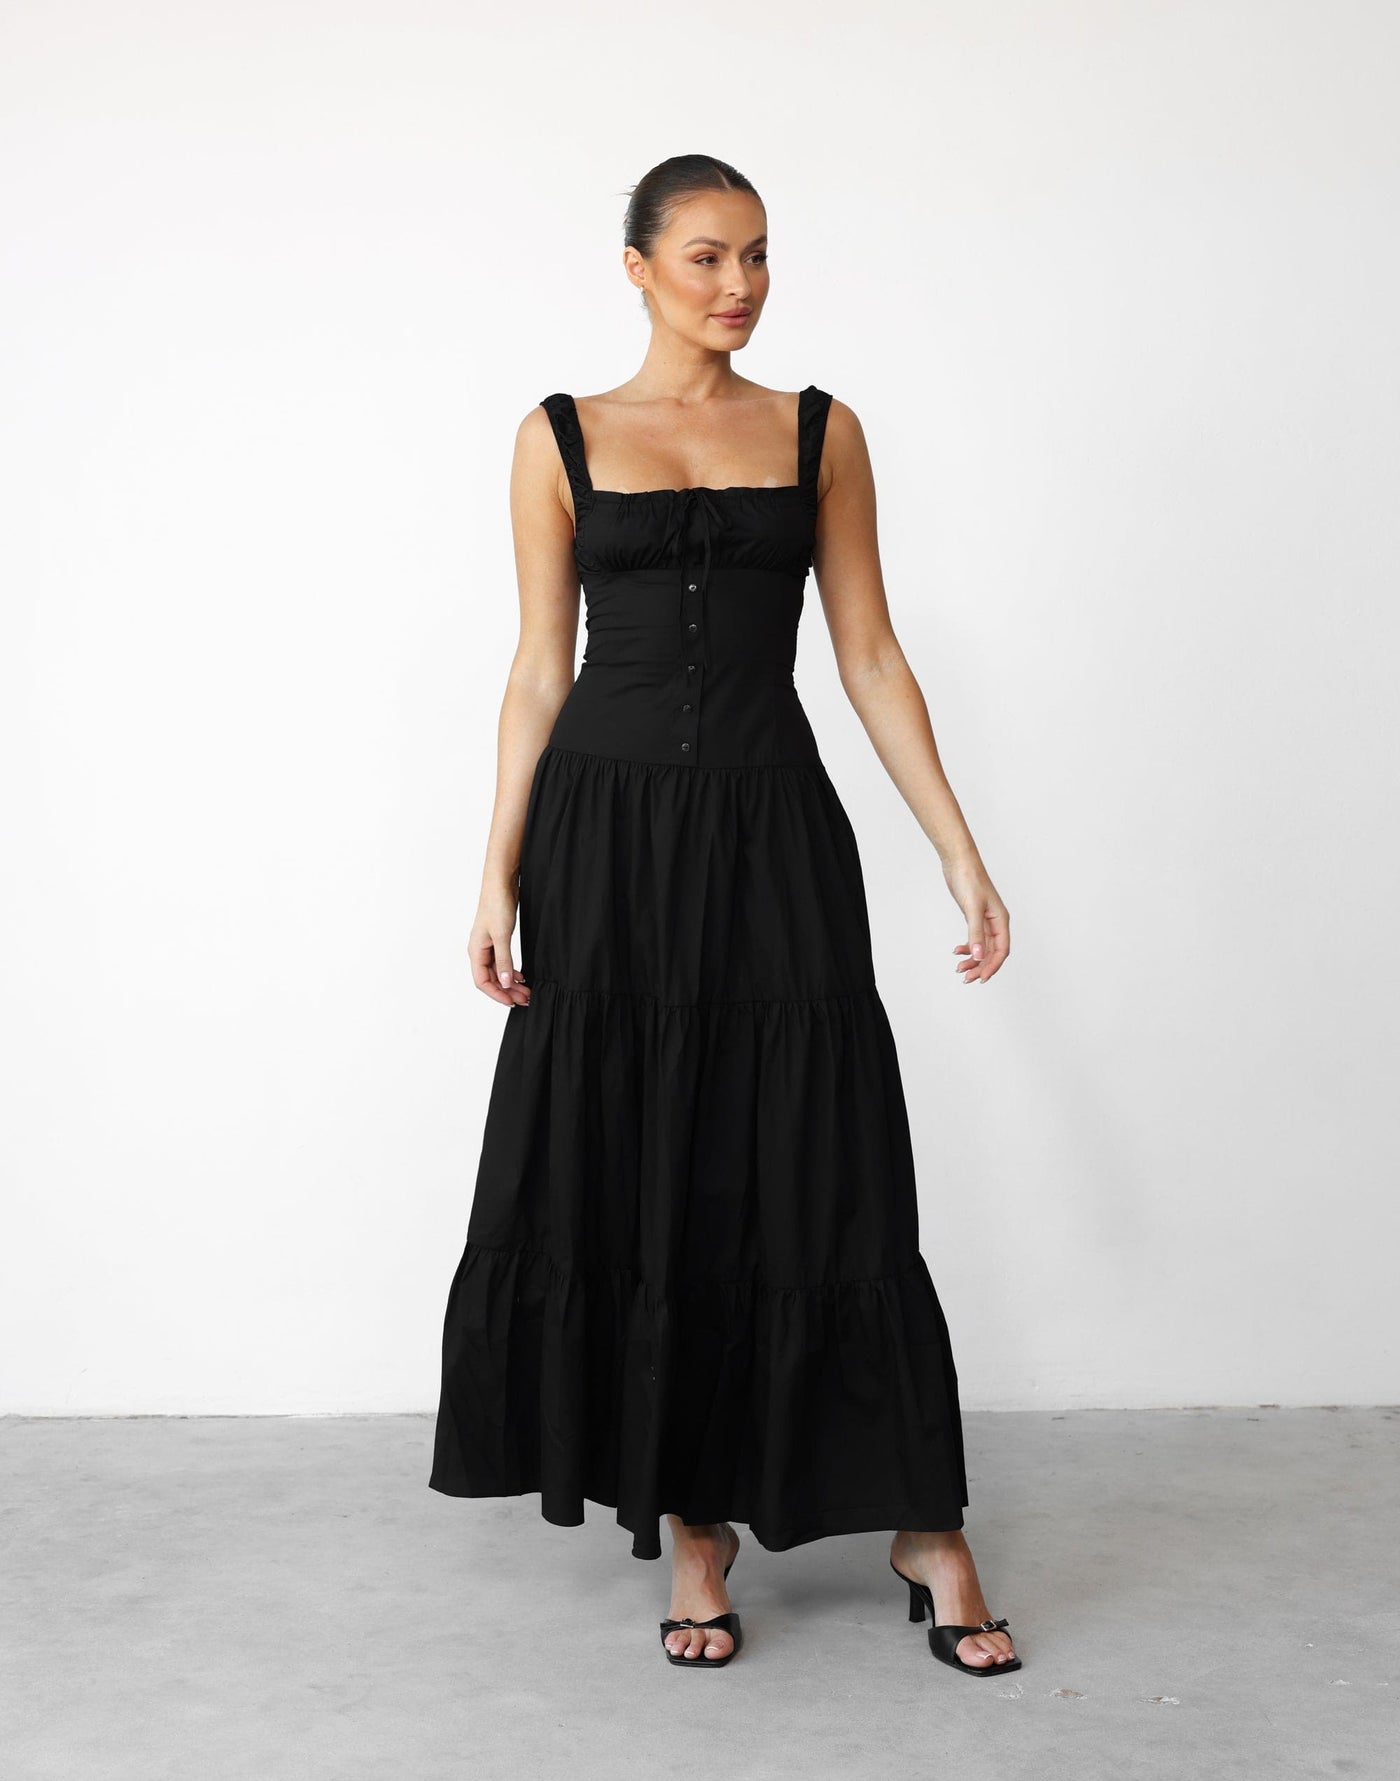 Heart Shaped Maxi (Onyx) - By Lioness - Corset Upper Ruched Maxi - Women's Dress - Charcoal Clothing